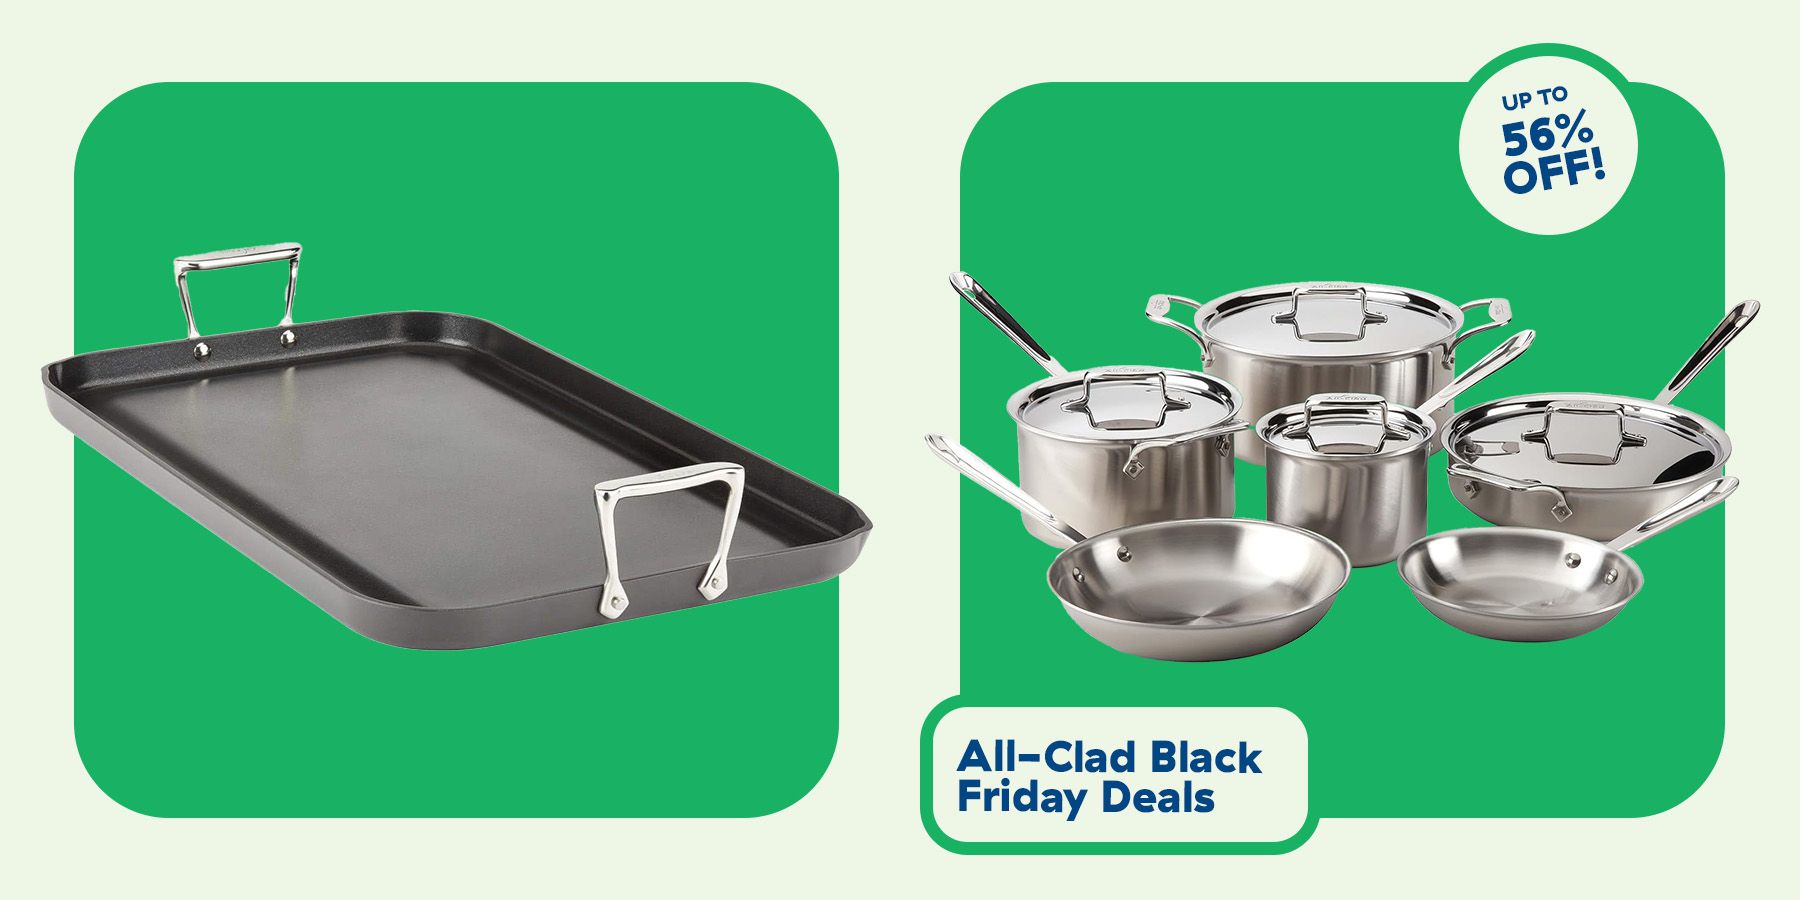 Black Friday home deals: Wayfair deals on All-Clad, Sol 72 before Prime Day